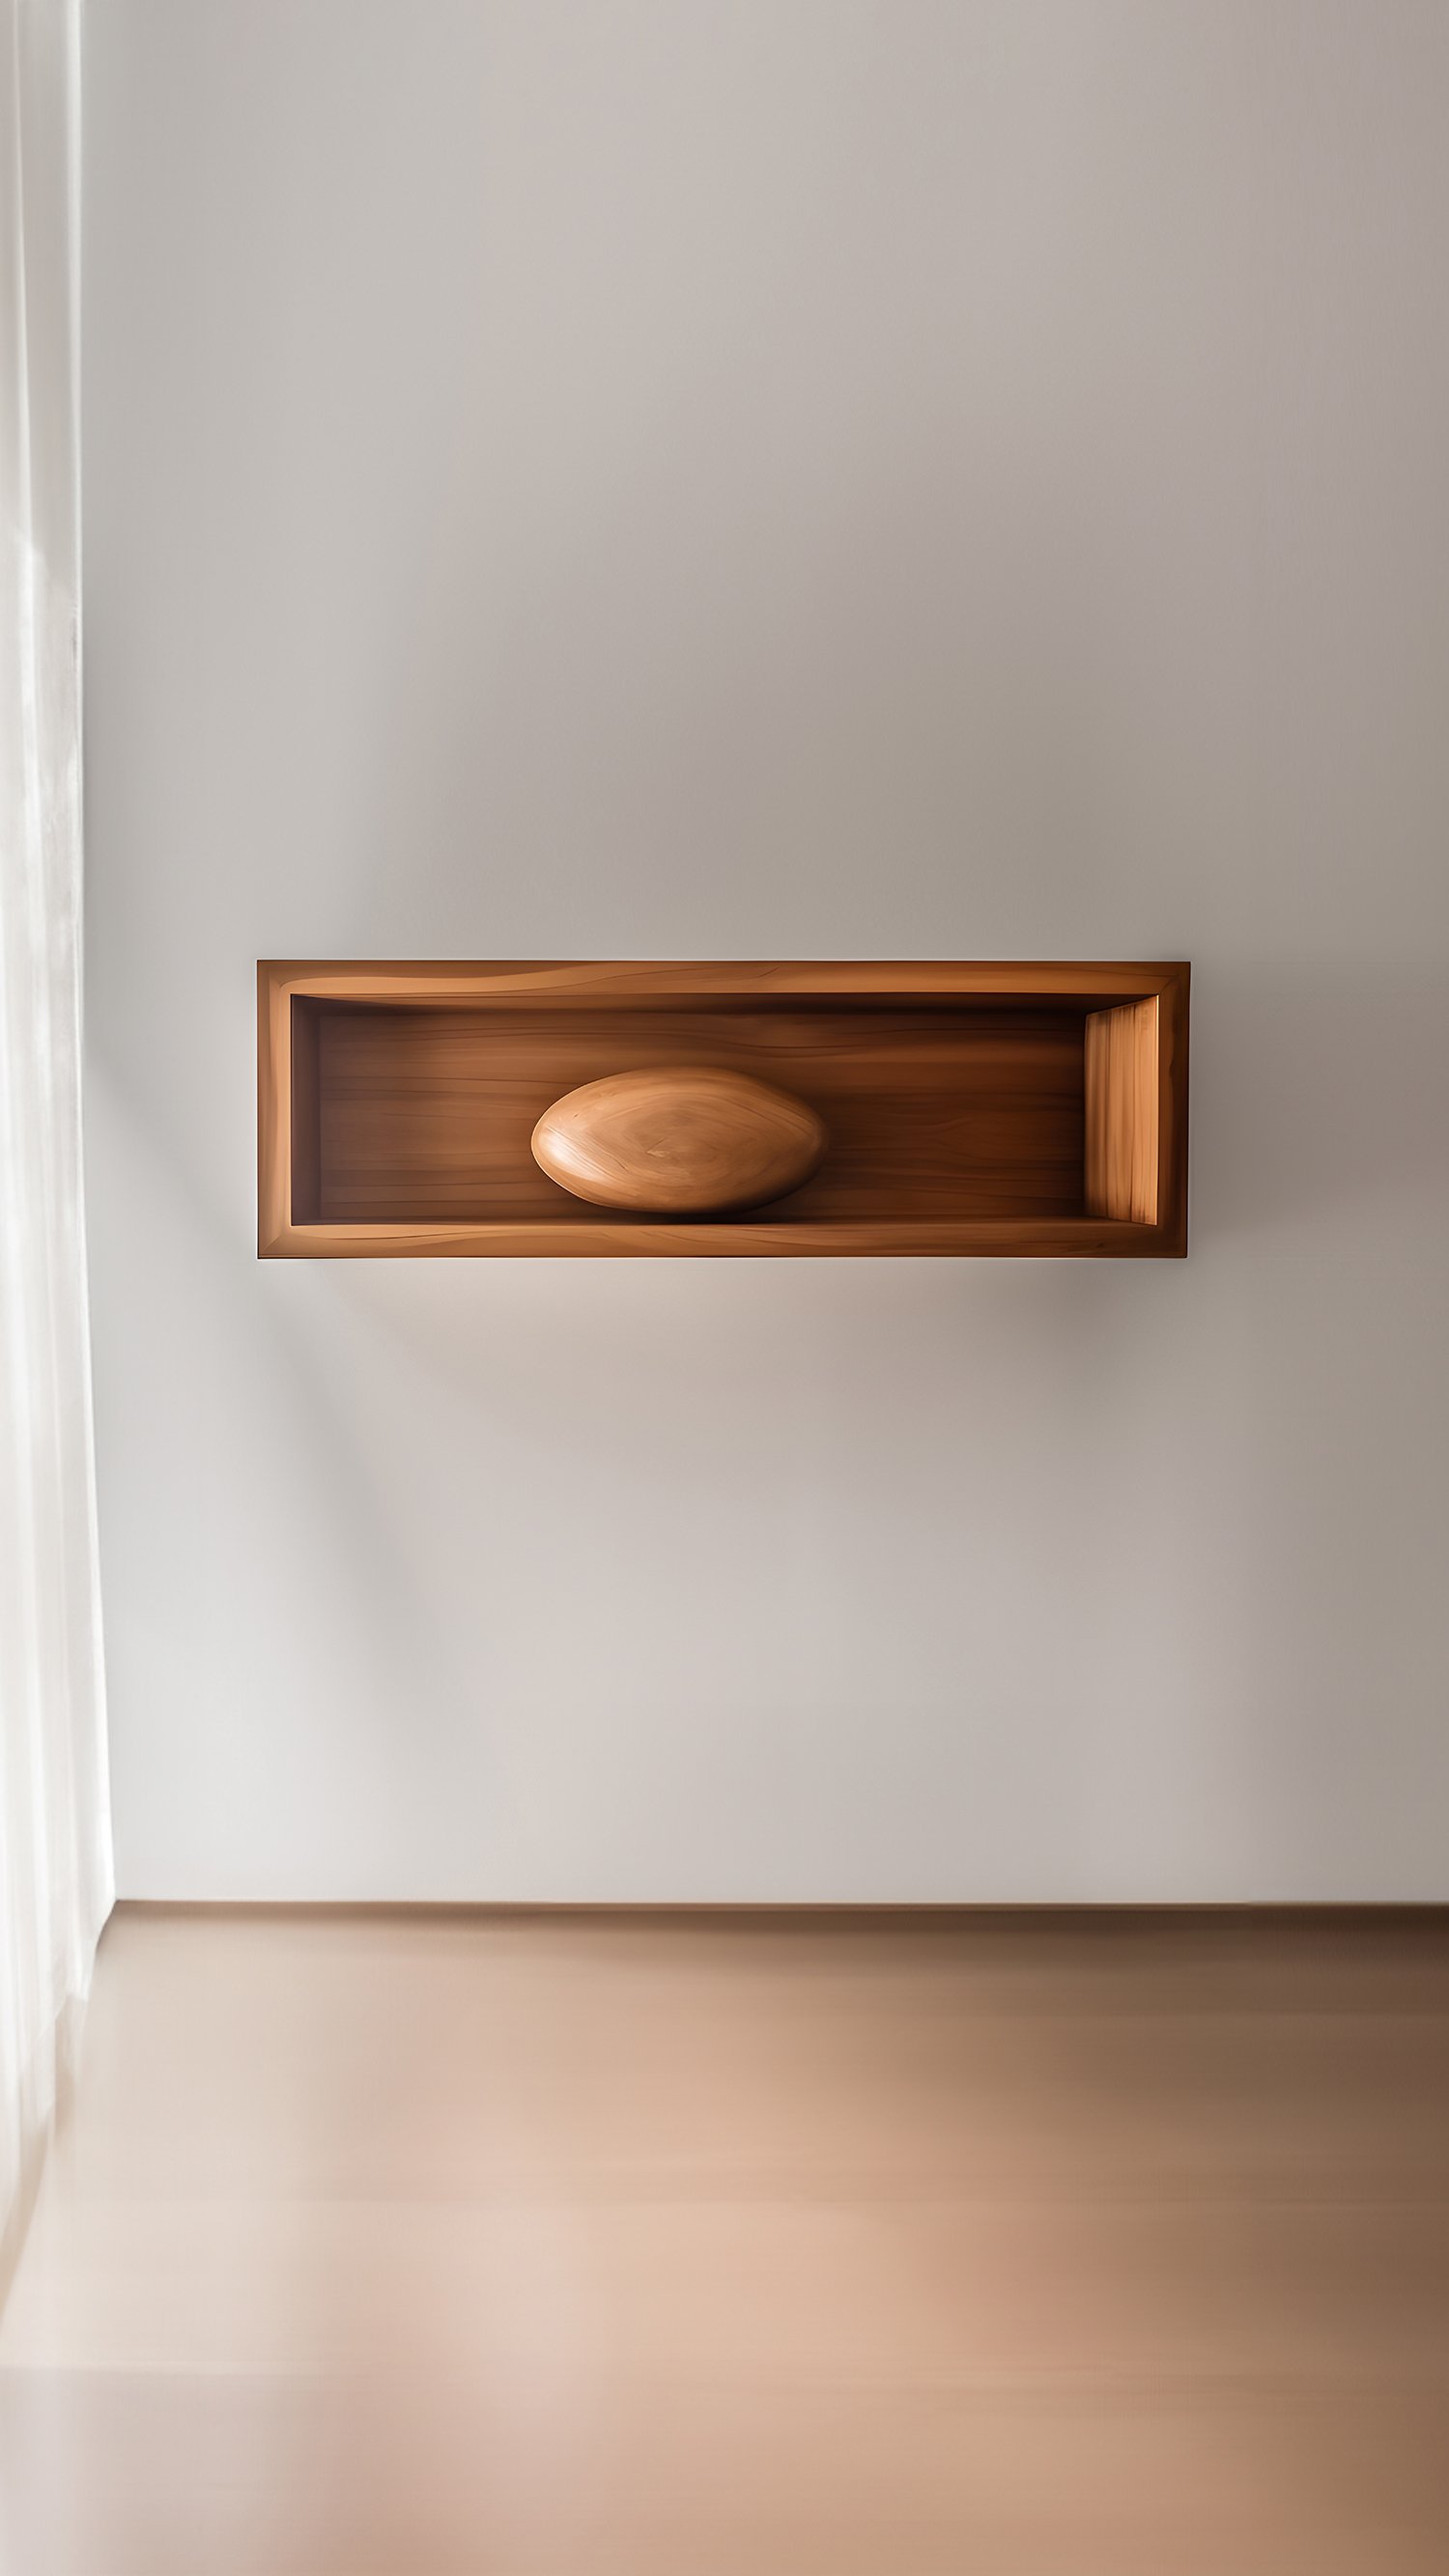 Rectangular Floating Shelf with Close Back and One Large Sculptural Wooden Pebble Accent, Sereno by Joel Escalona — 2.jpg